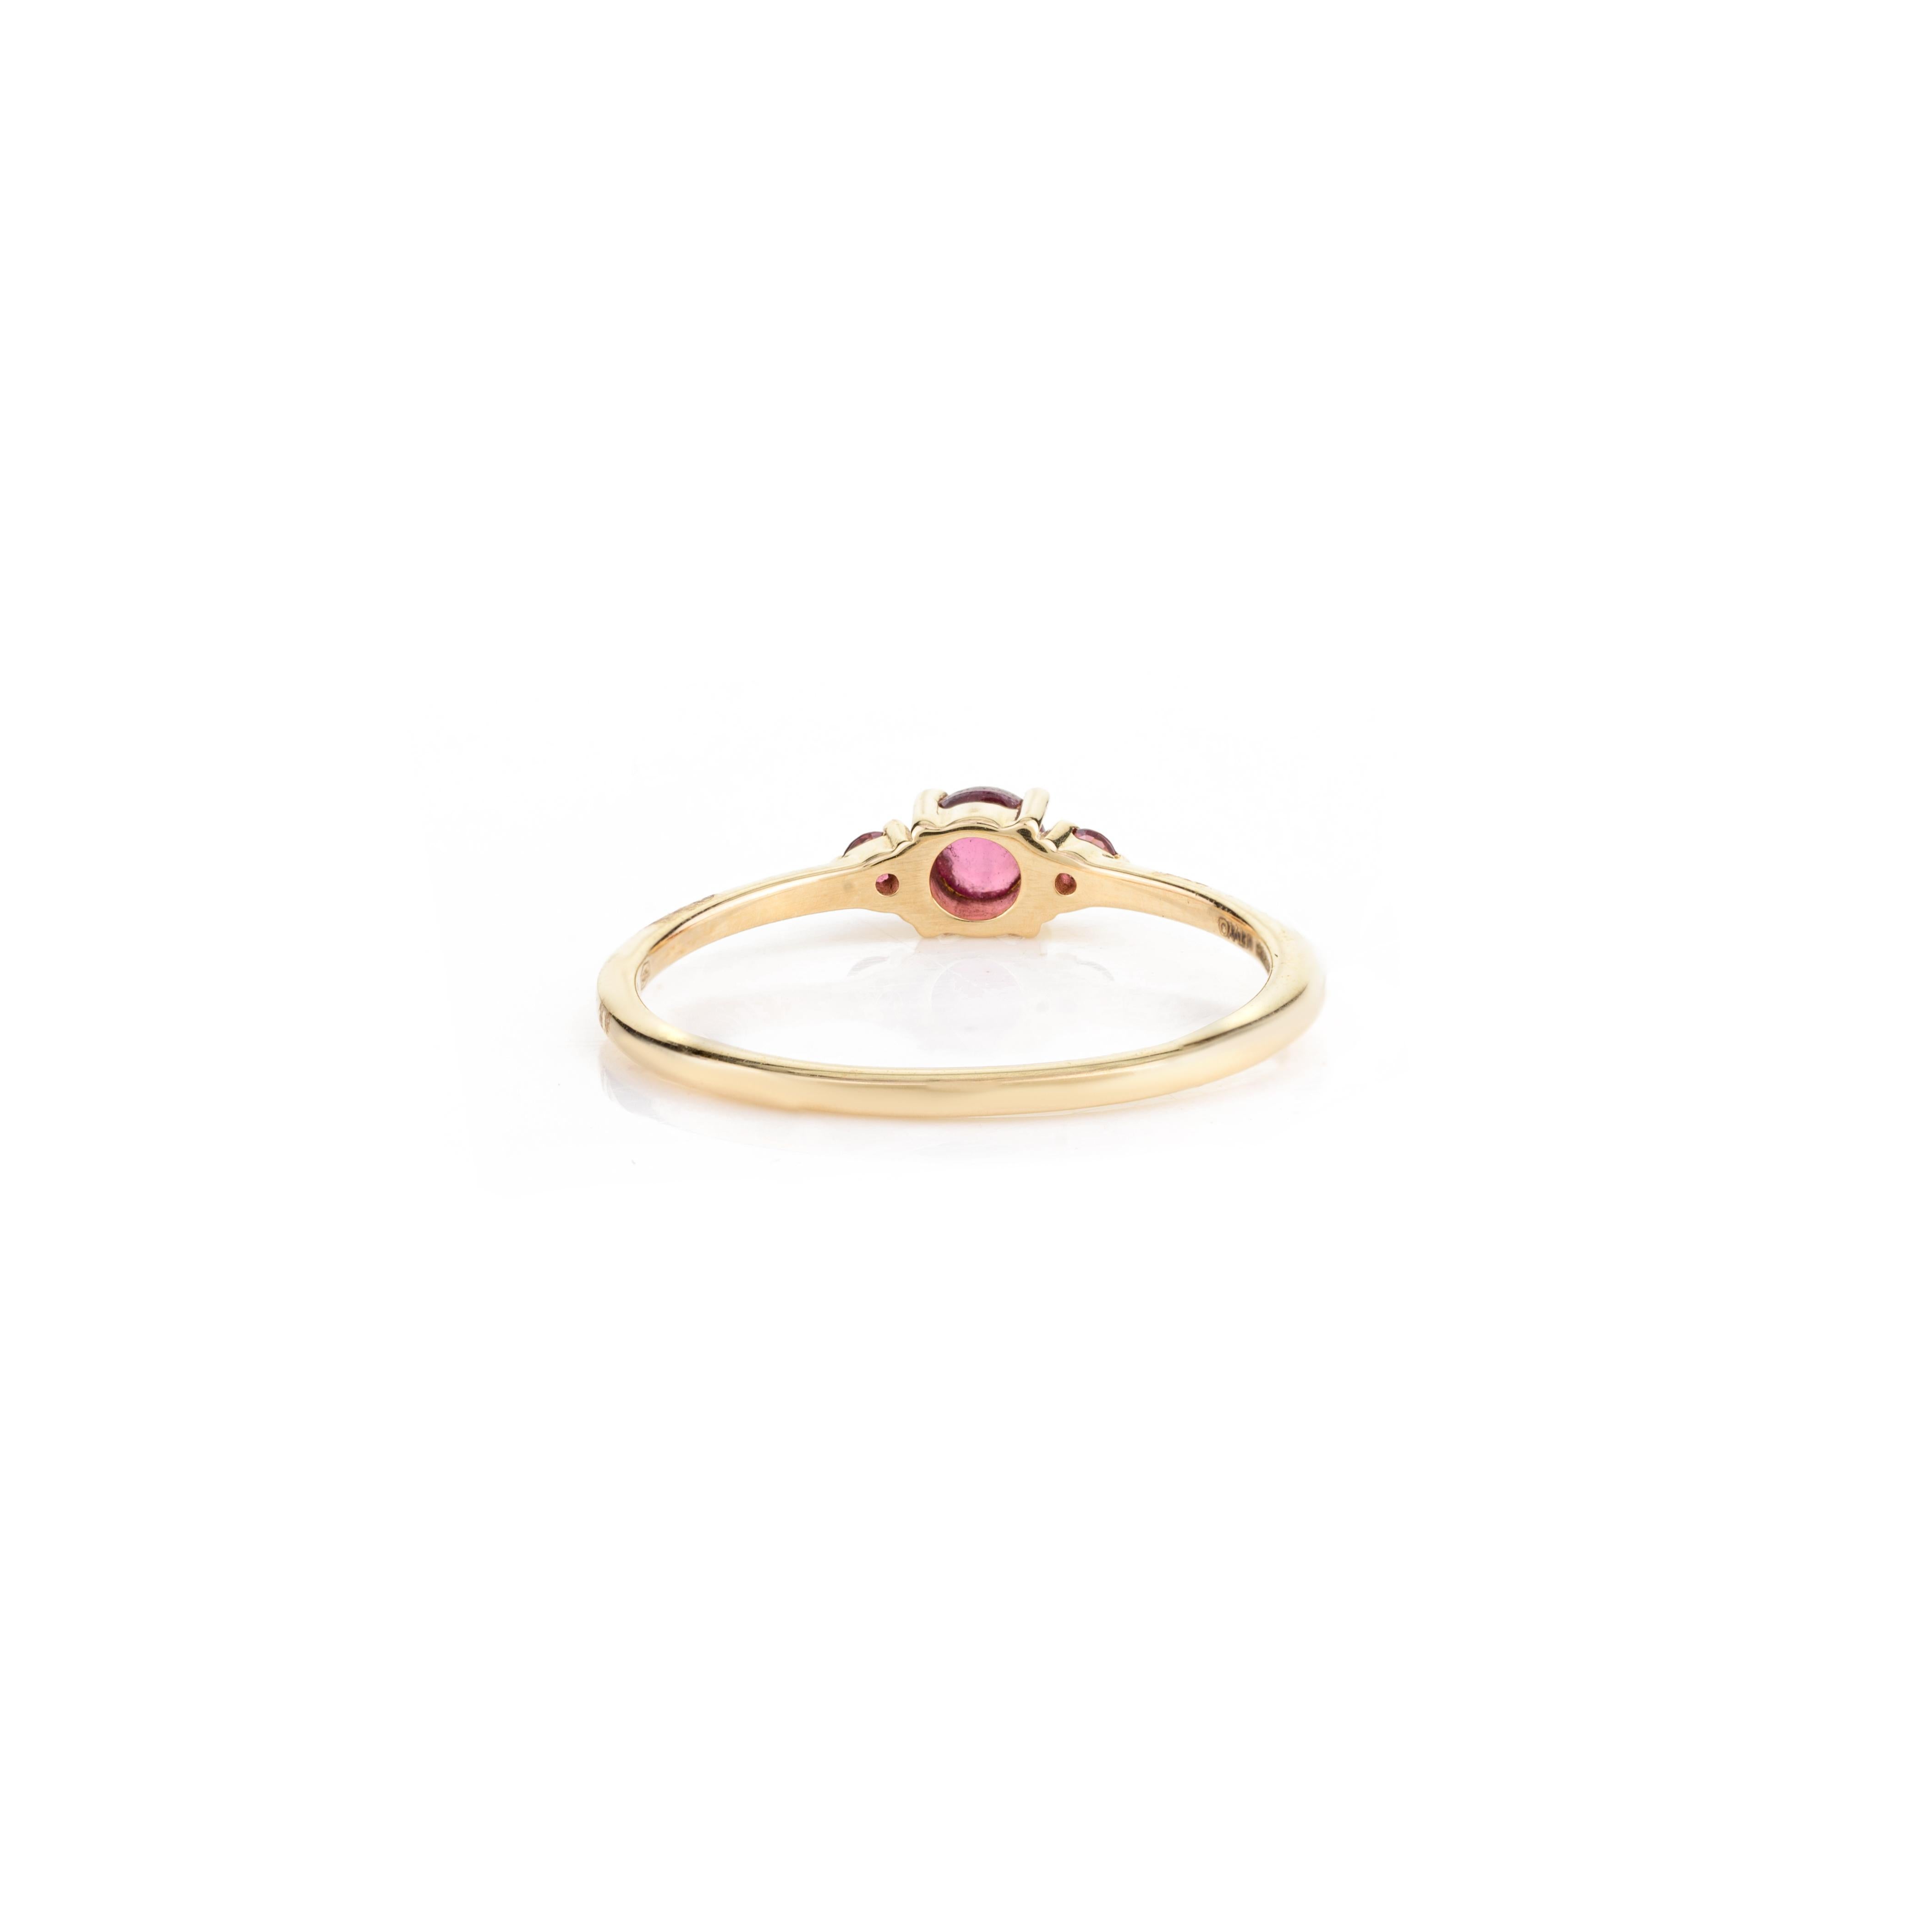 For Sale:  Dainty Three Stone Garnet Ring 14k Solid Yellow Gold Promise Ring for Her 5